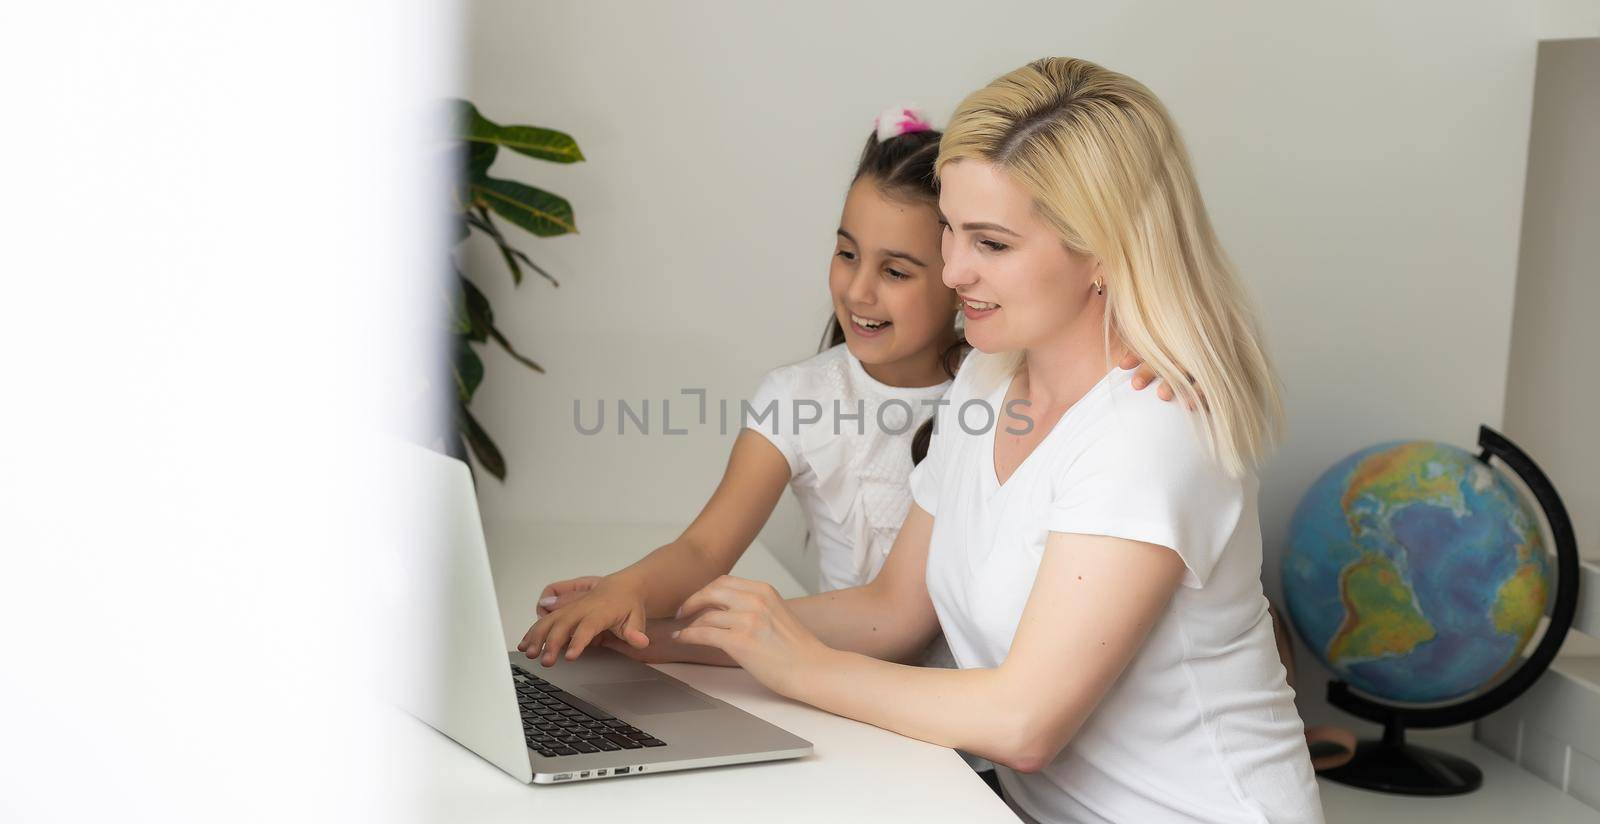 Online education of children. Mother and daughter of preschool watching a video lesson call chat at home